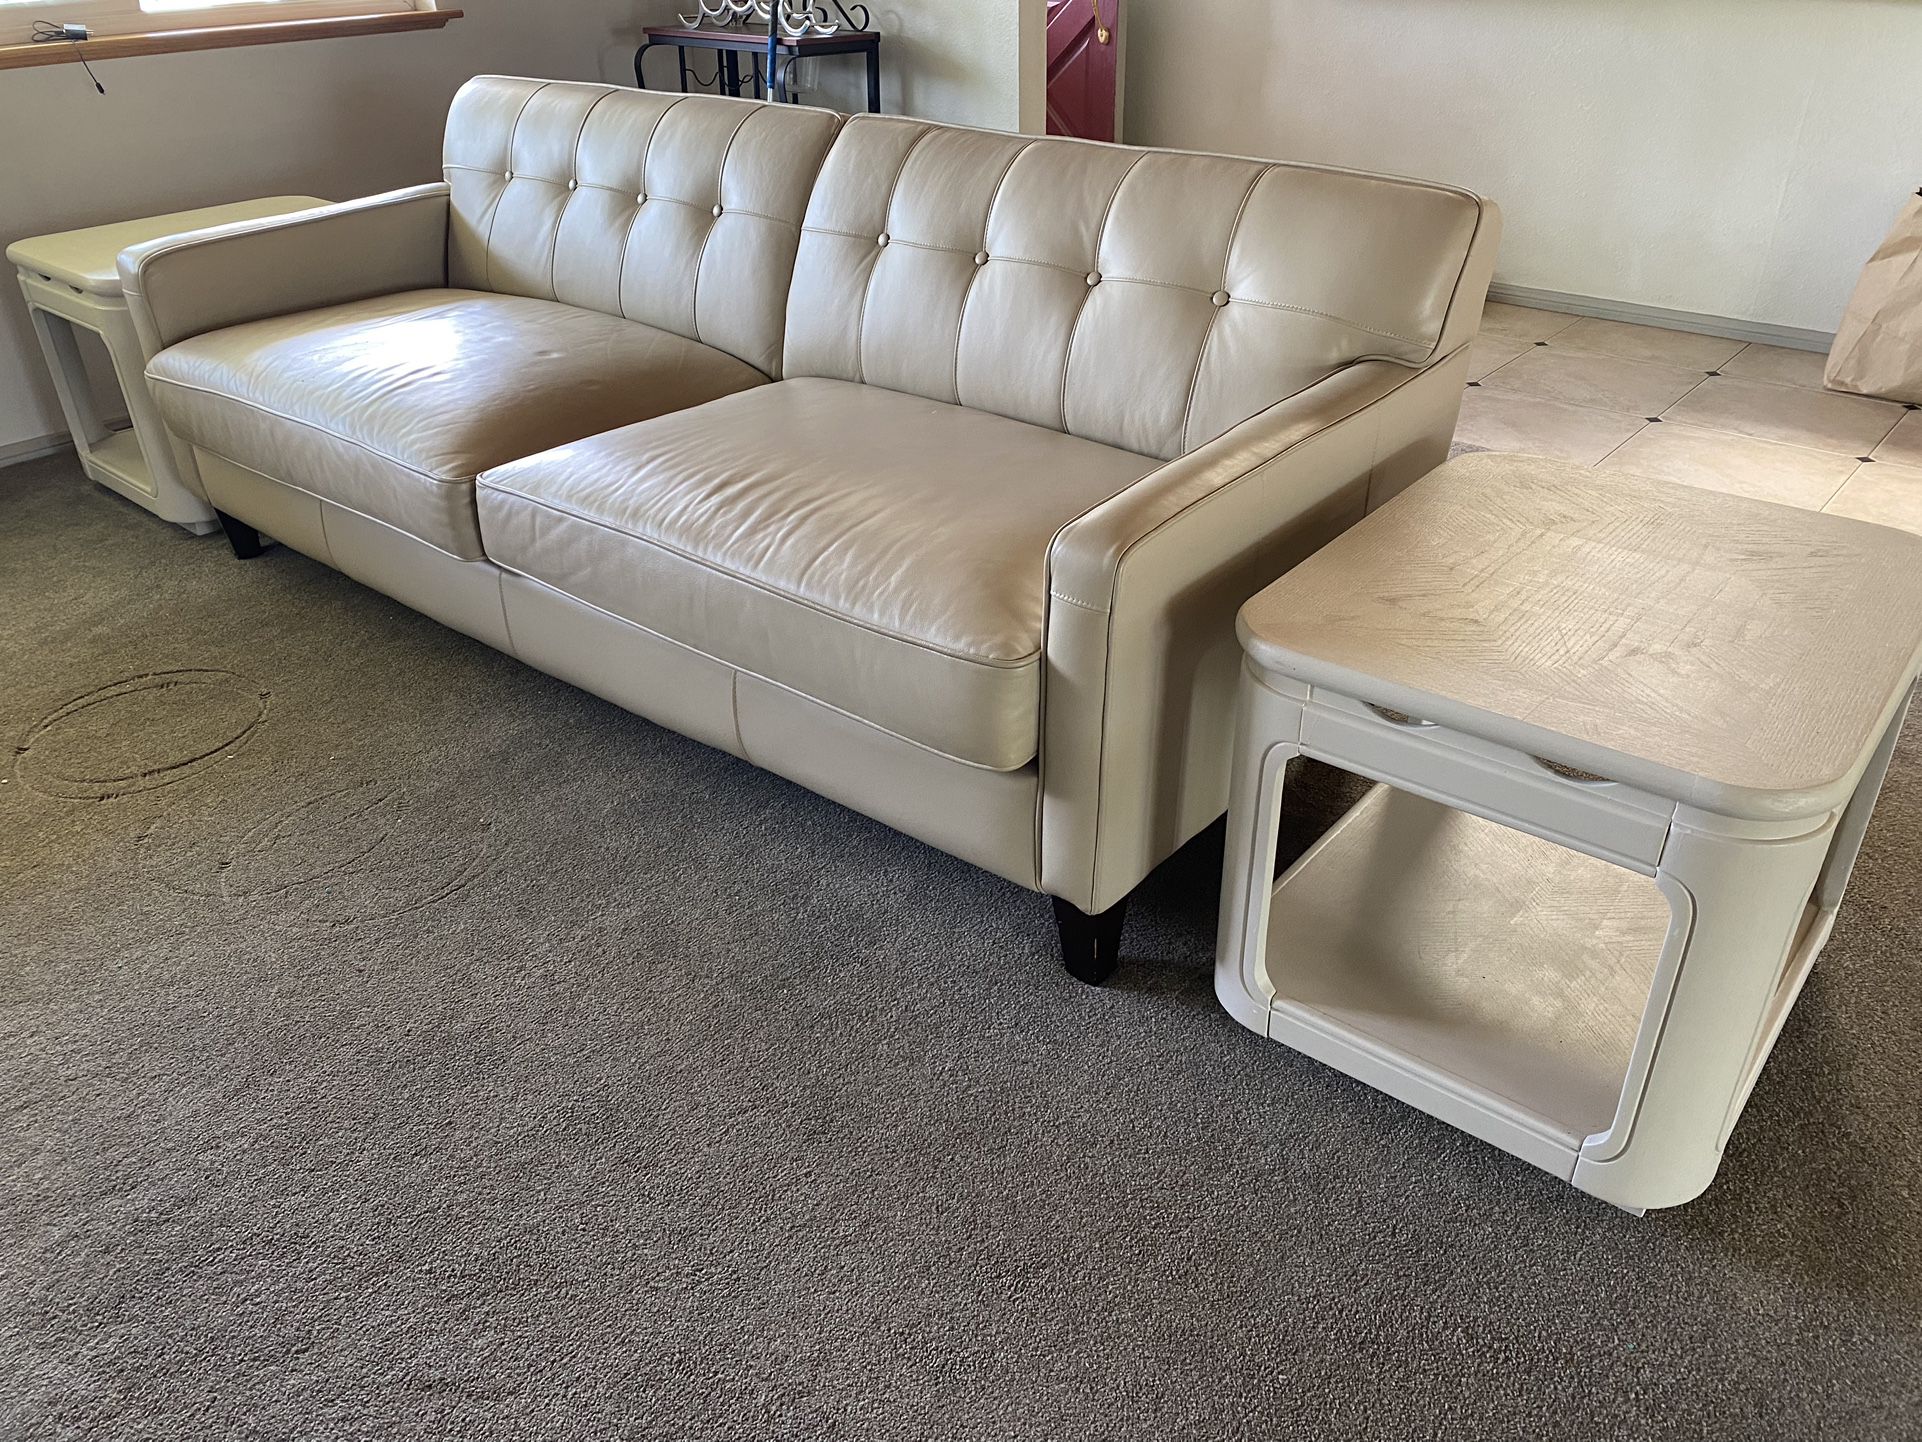 Soft Leather Couch And End Tables